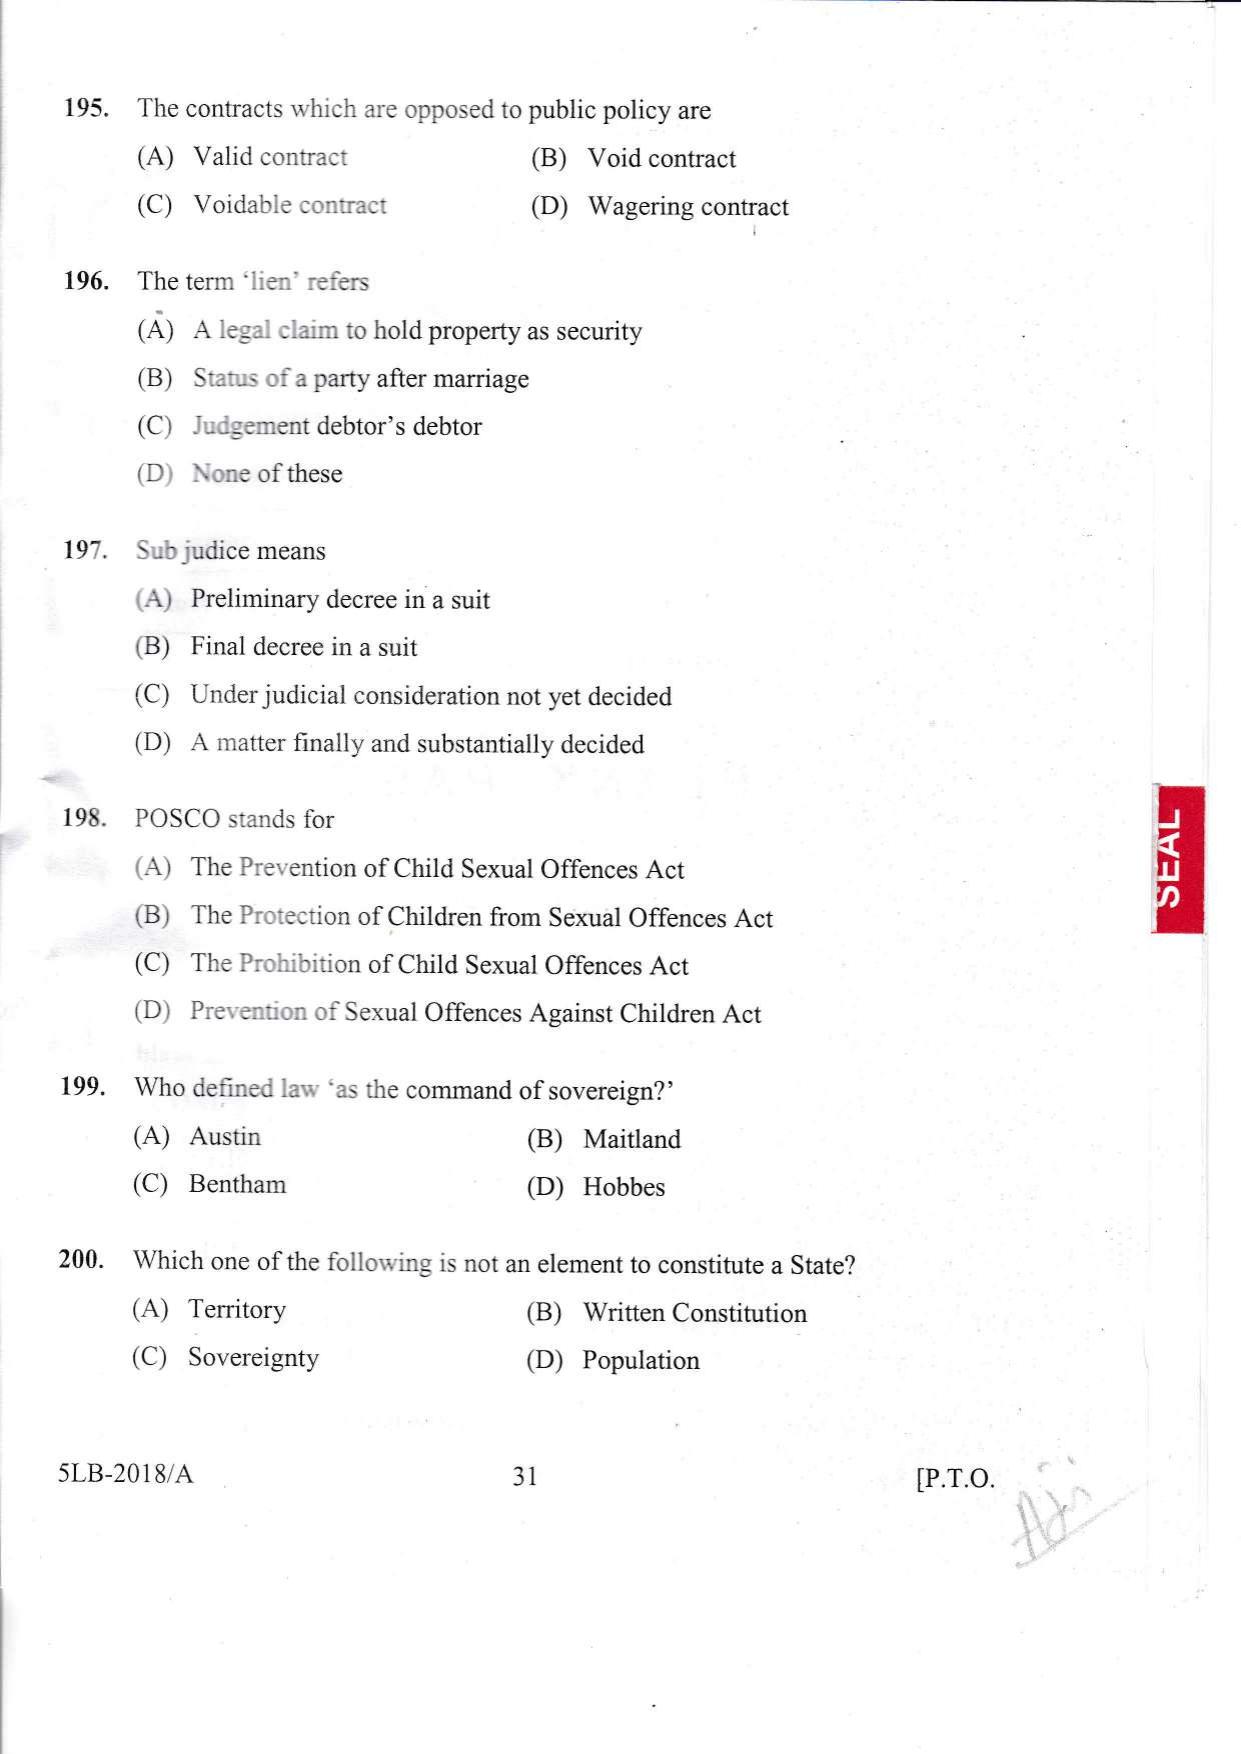 KLEE 5 Year LLB Exam 2018 Question Paper - Page 31